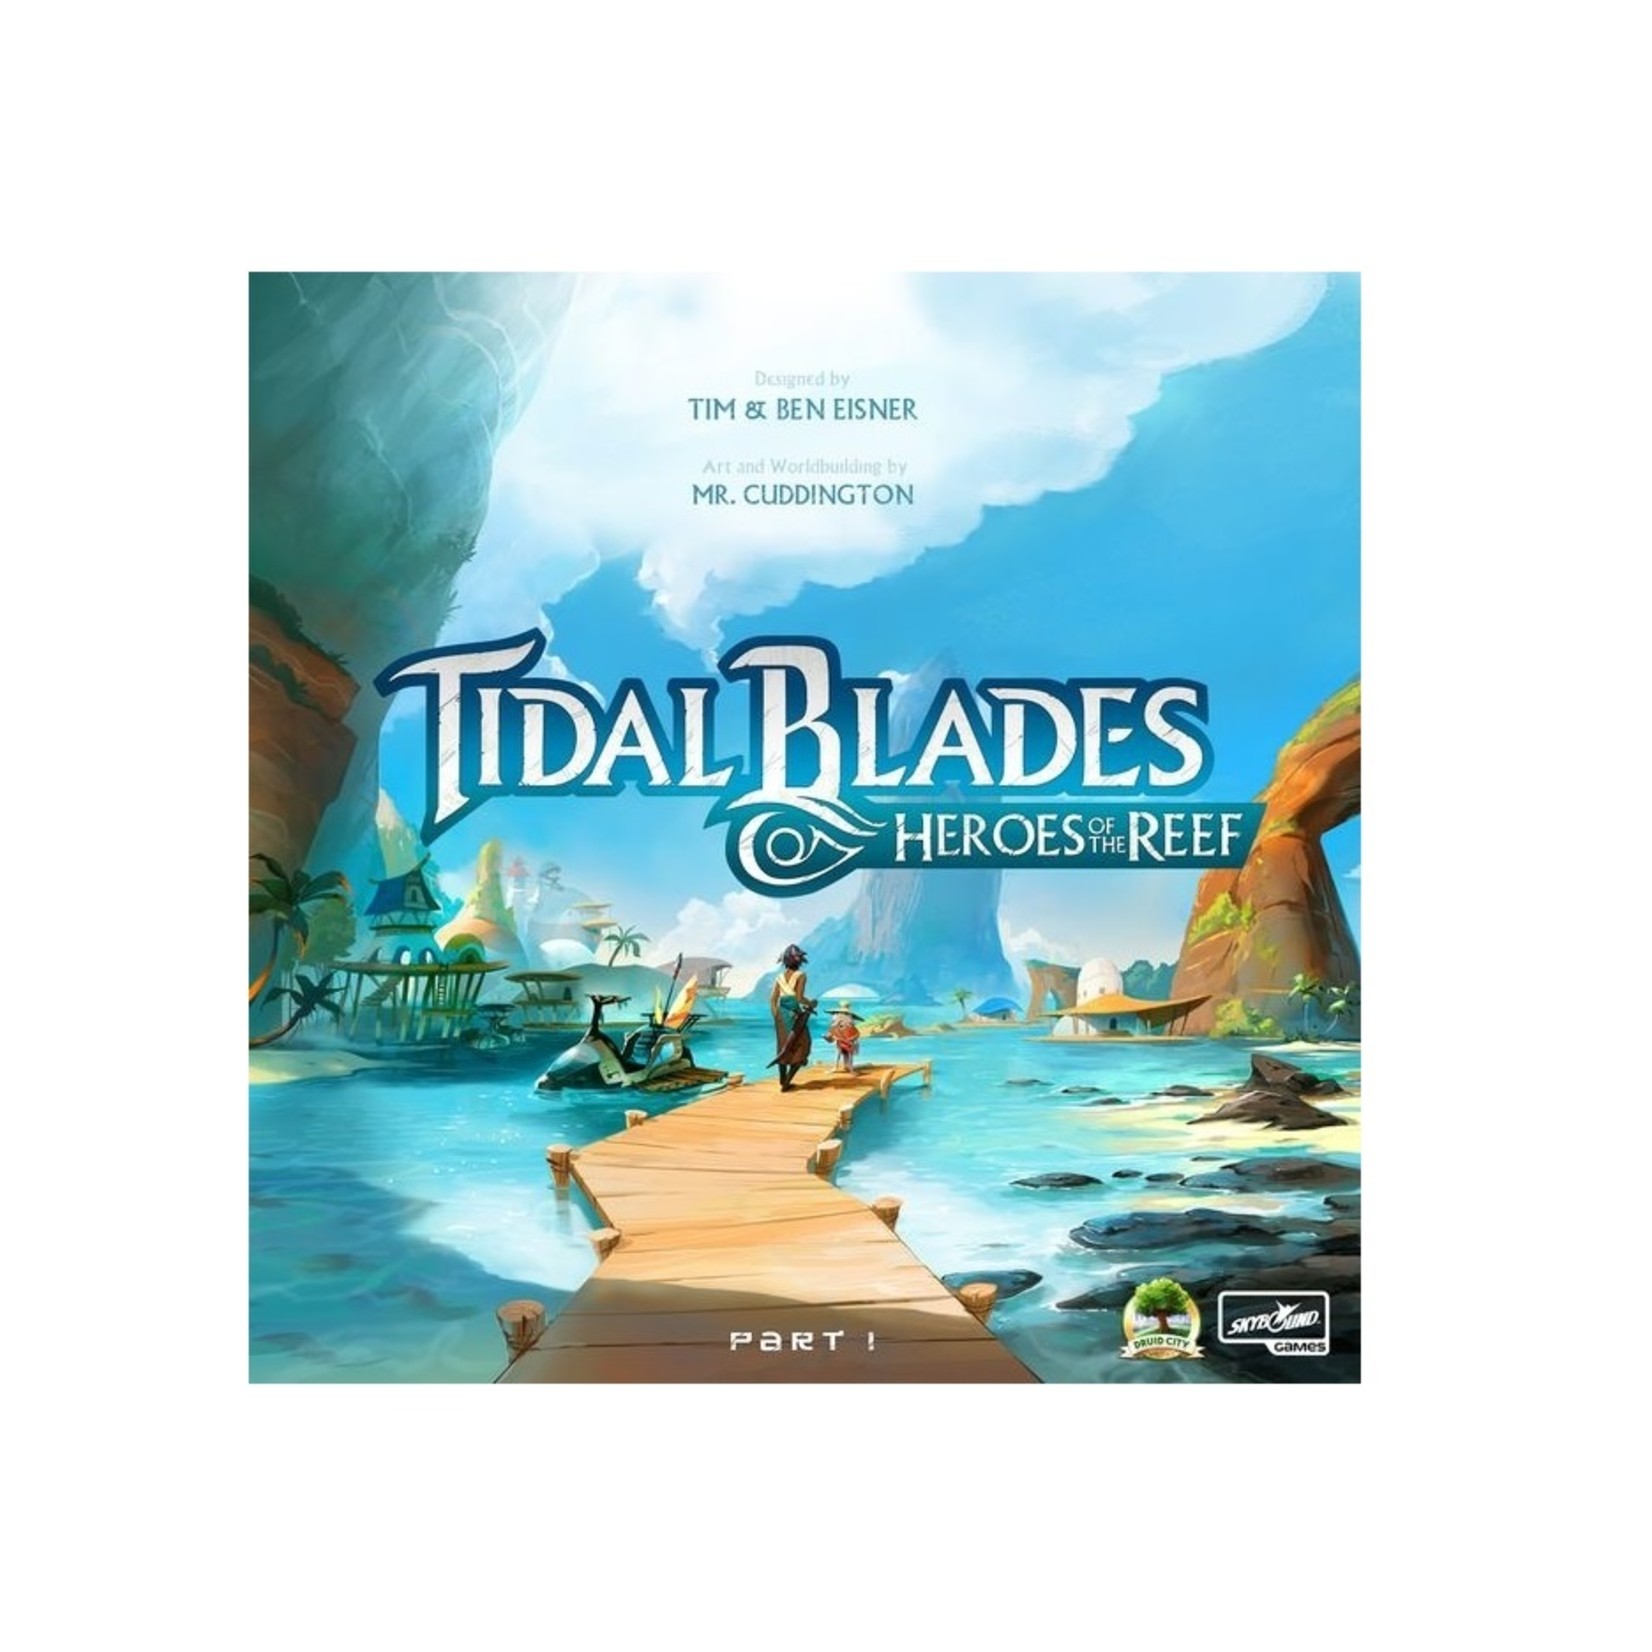 Tidal Blades - Heroes of the reef (English)